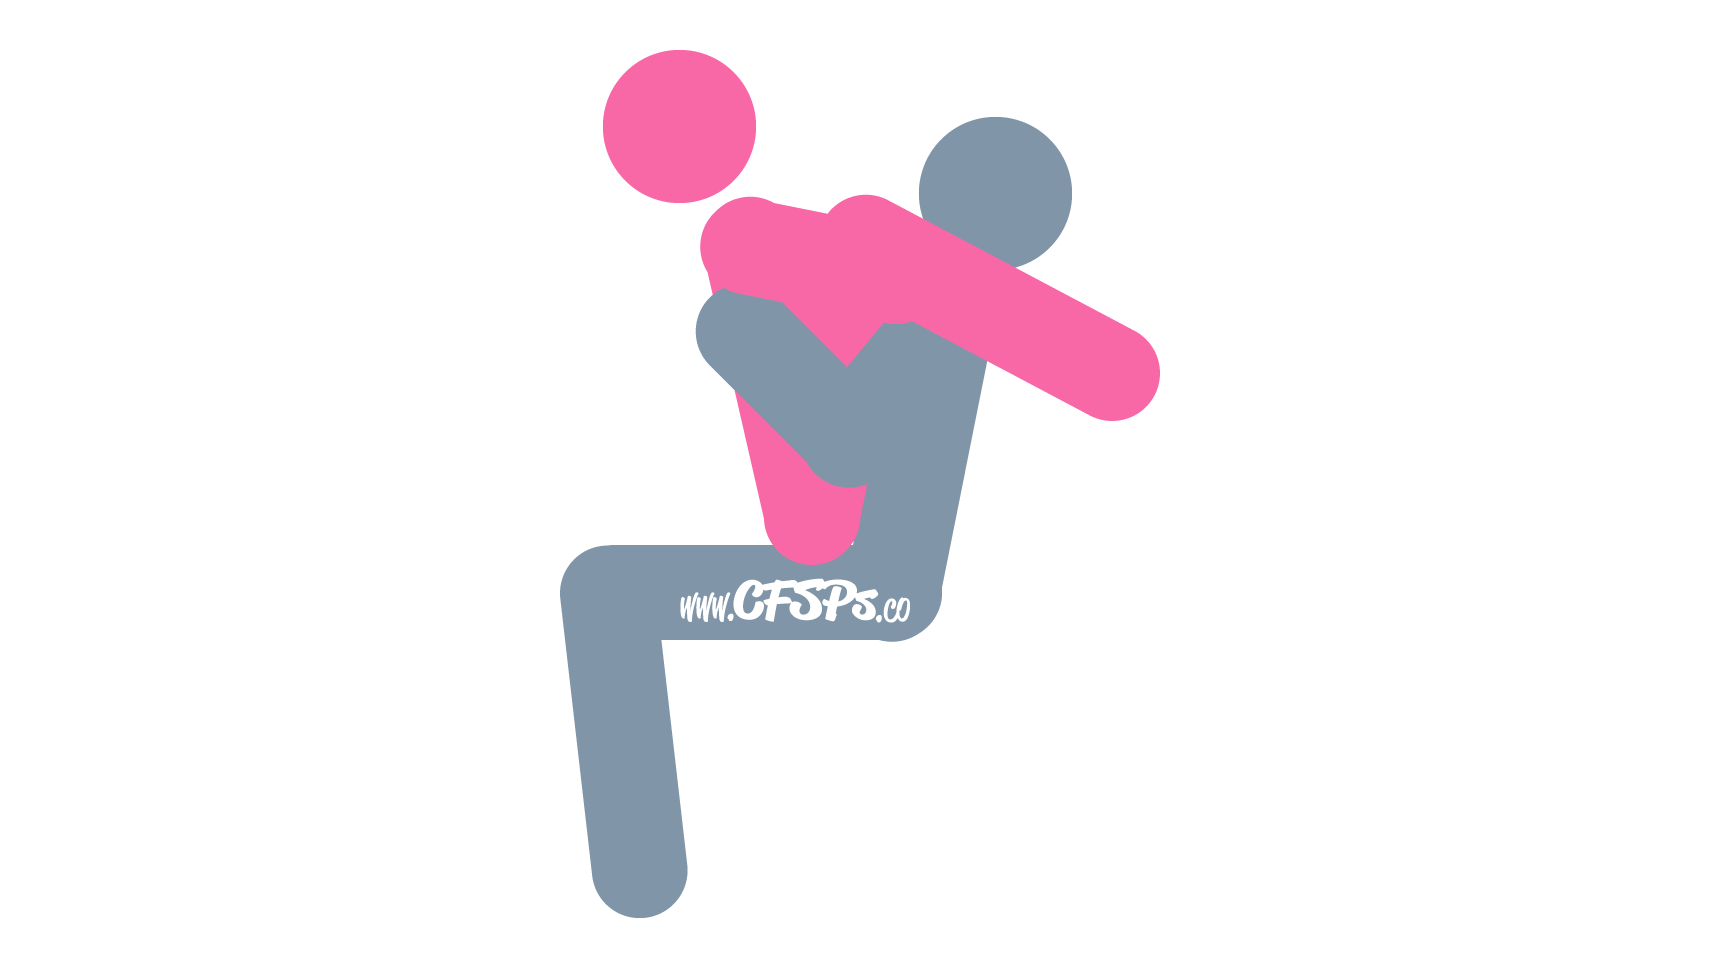 This stick figure image depicts a man and woman having sex in the Lap Top sex position. The man is sitting on the recliner or couch with his legs closed. The woman is sitting on his lap with her legs over his shoulders and arms around his neck. The man's arms are around her back for support.